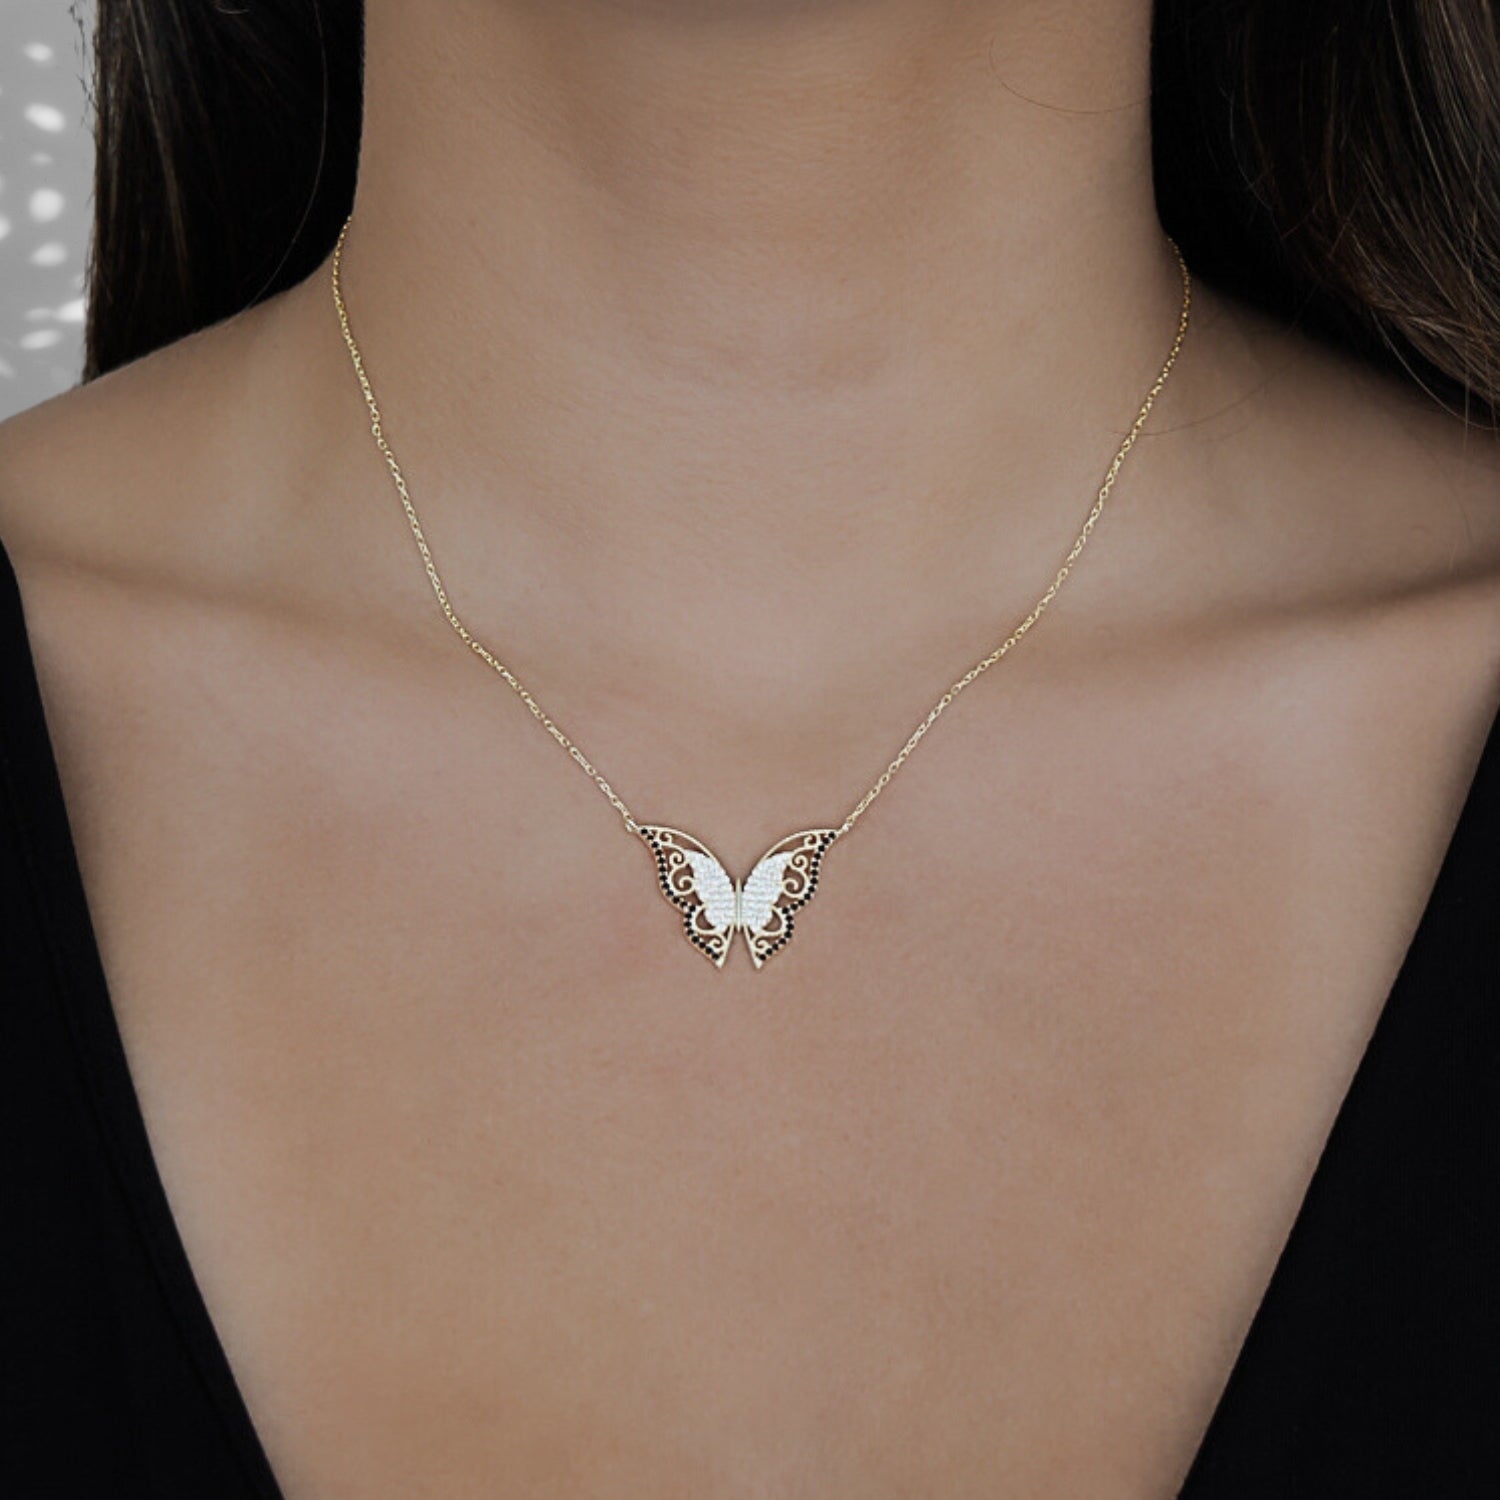 Model wearing the Gold Sparkly Joyful Butterfly Necklace, radiating joy and embracing the transformative symbolism of the butterfly.